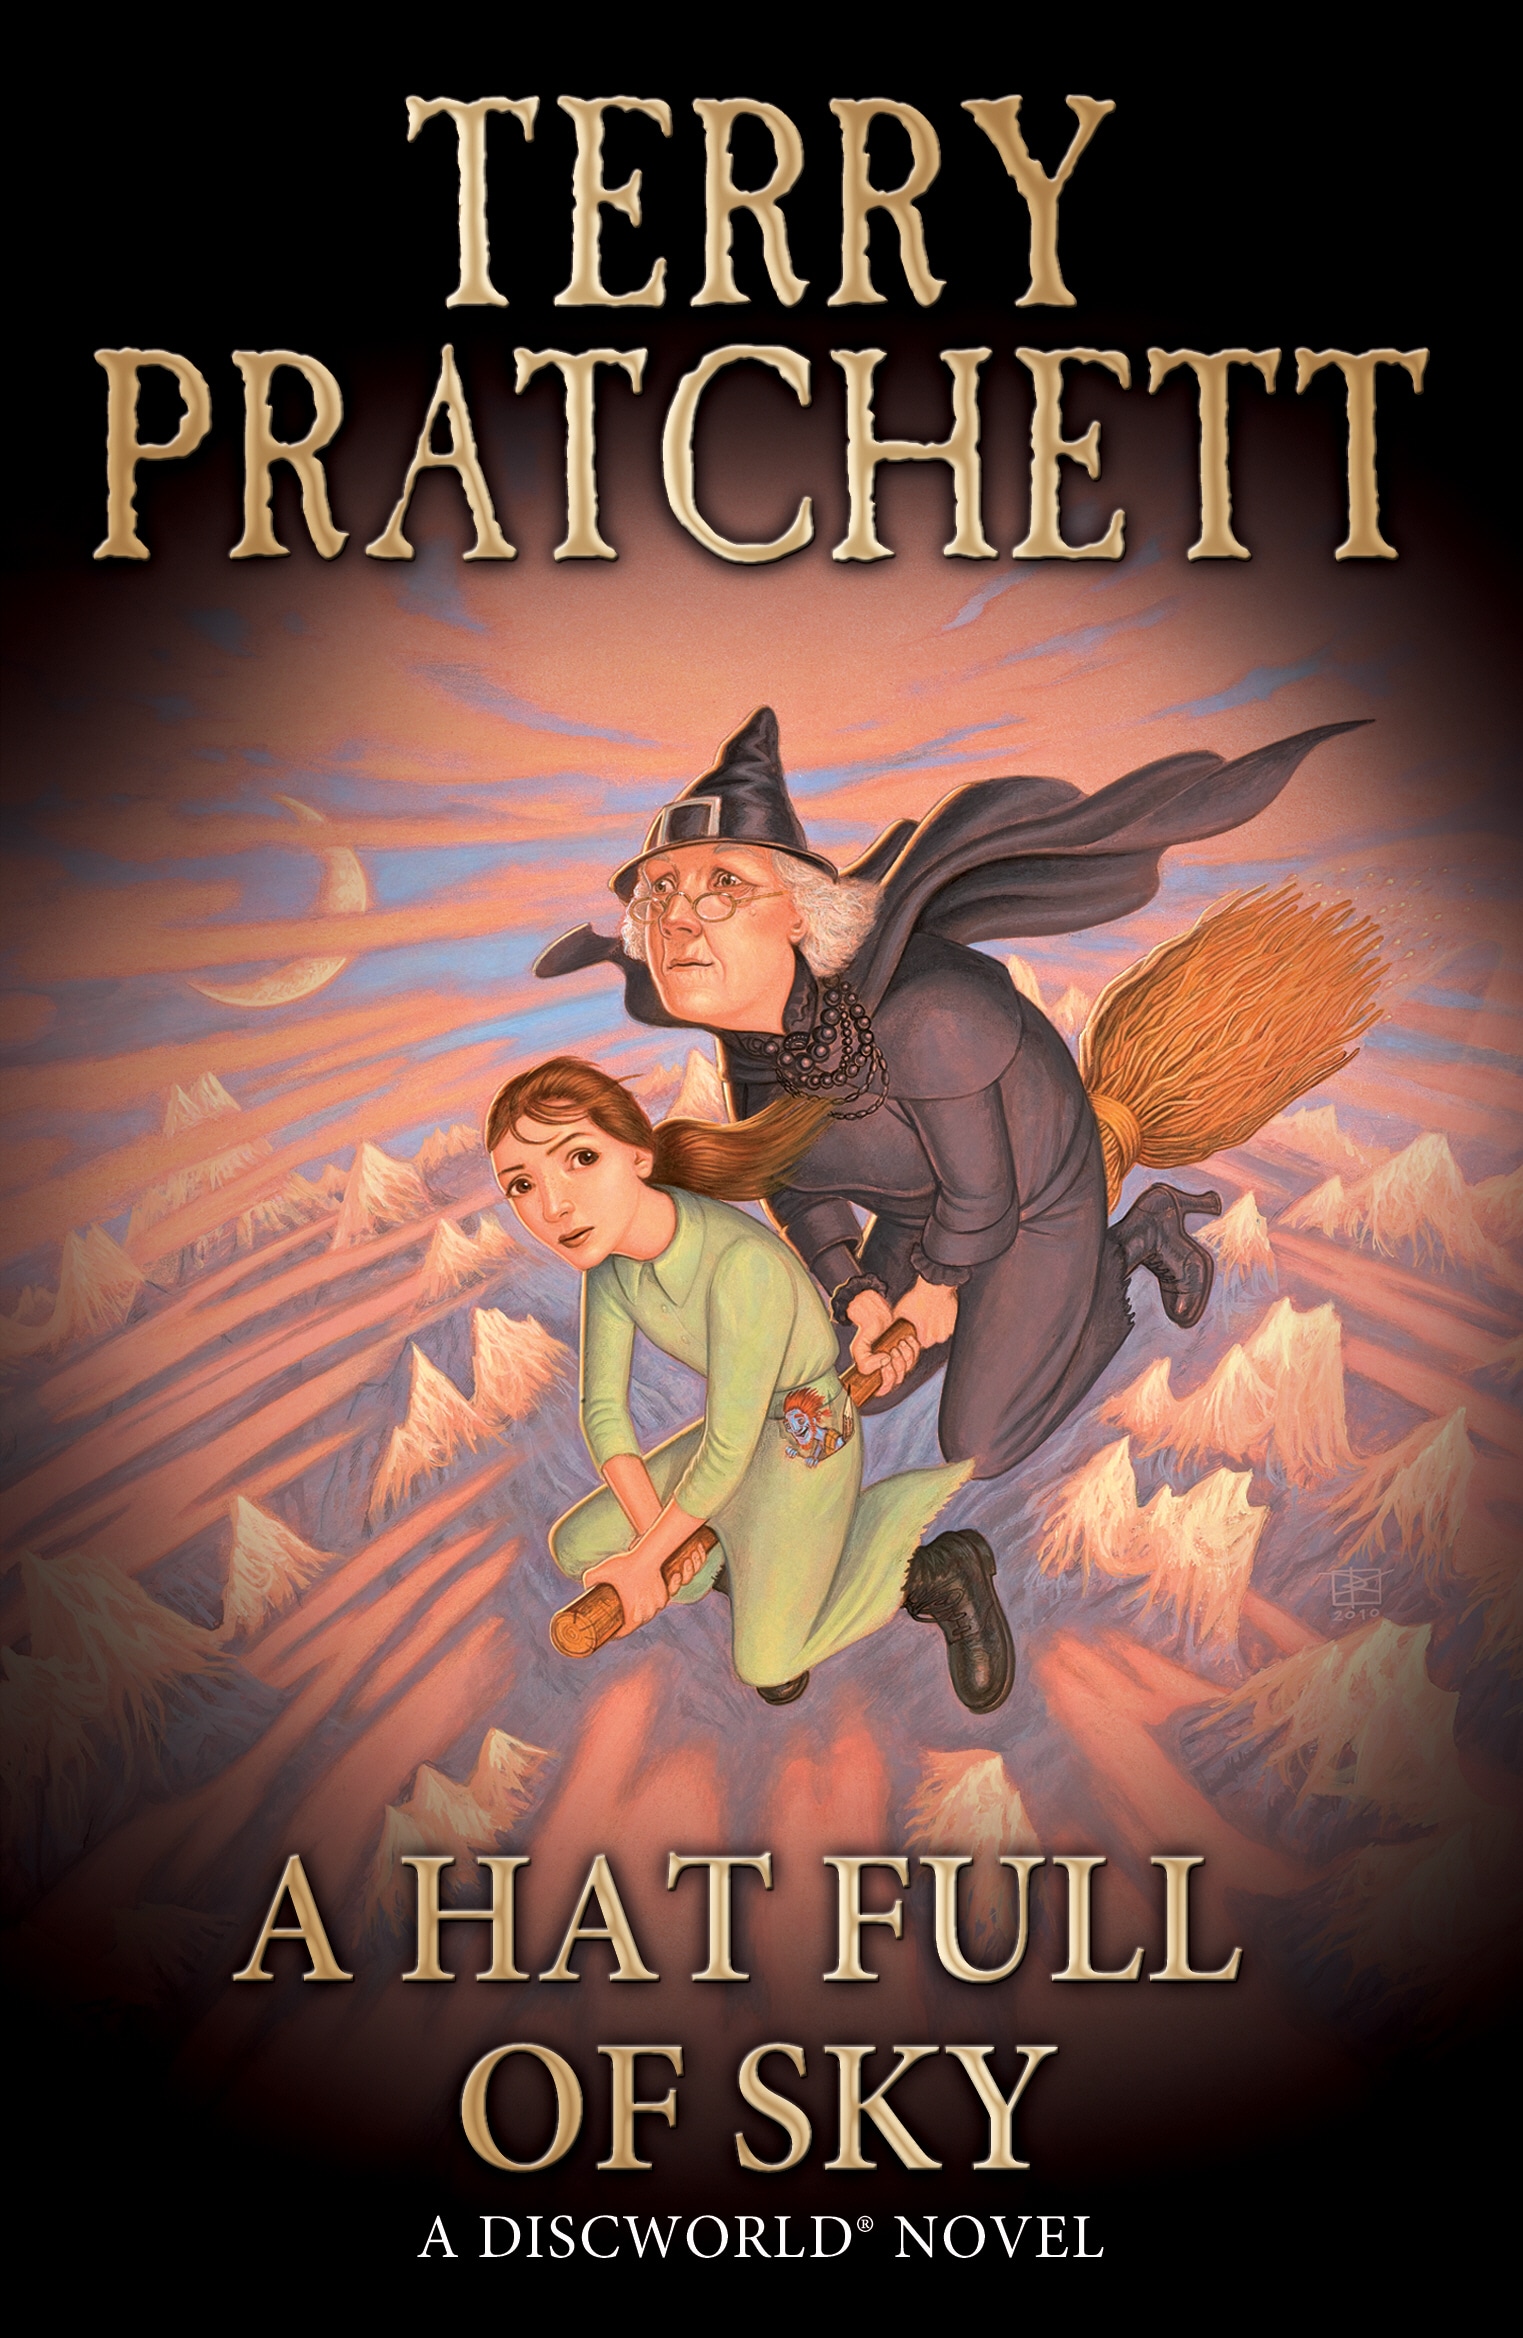 Book “A Hat Full of Sky” by Terry Pratchett — May 5, 2005